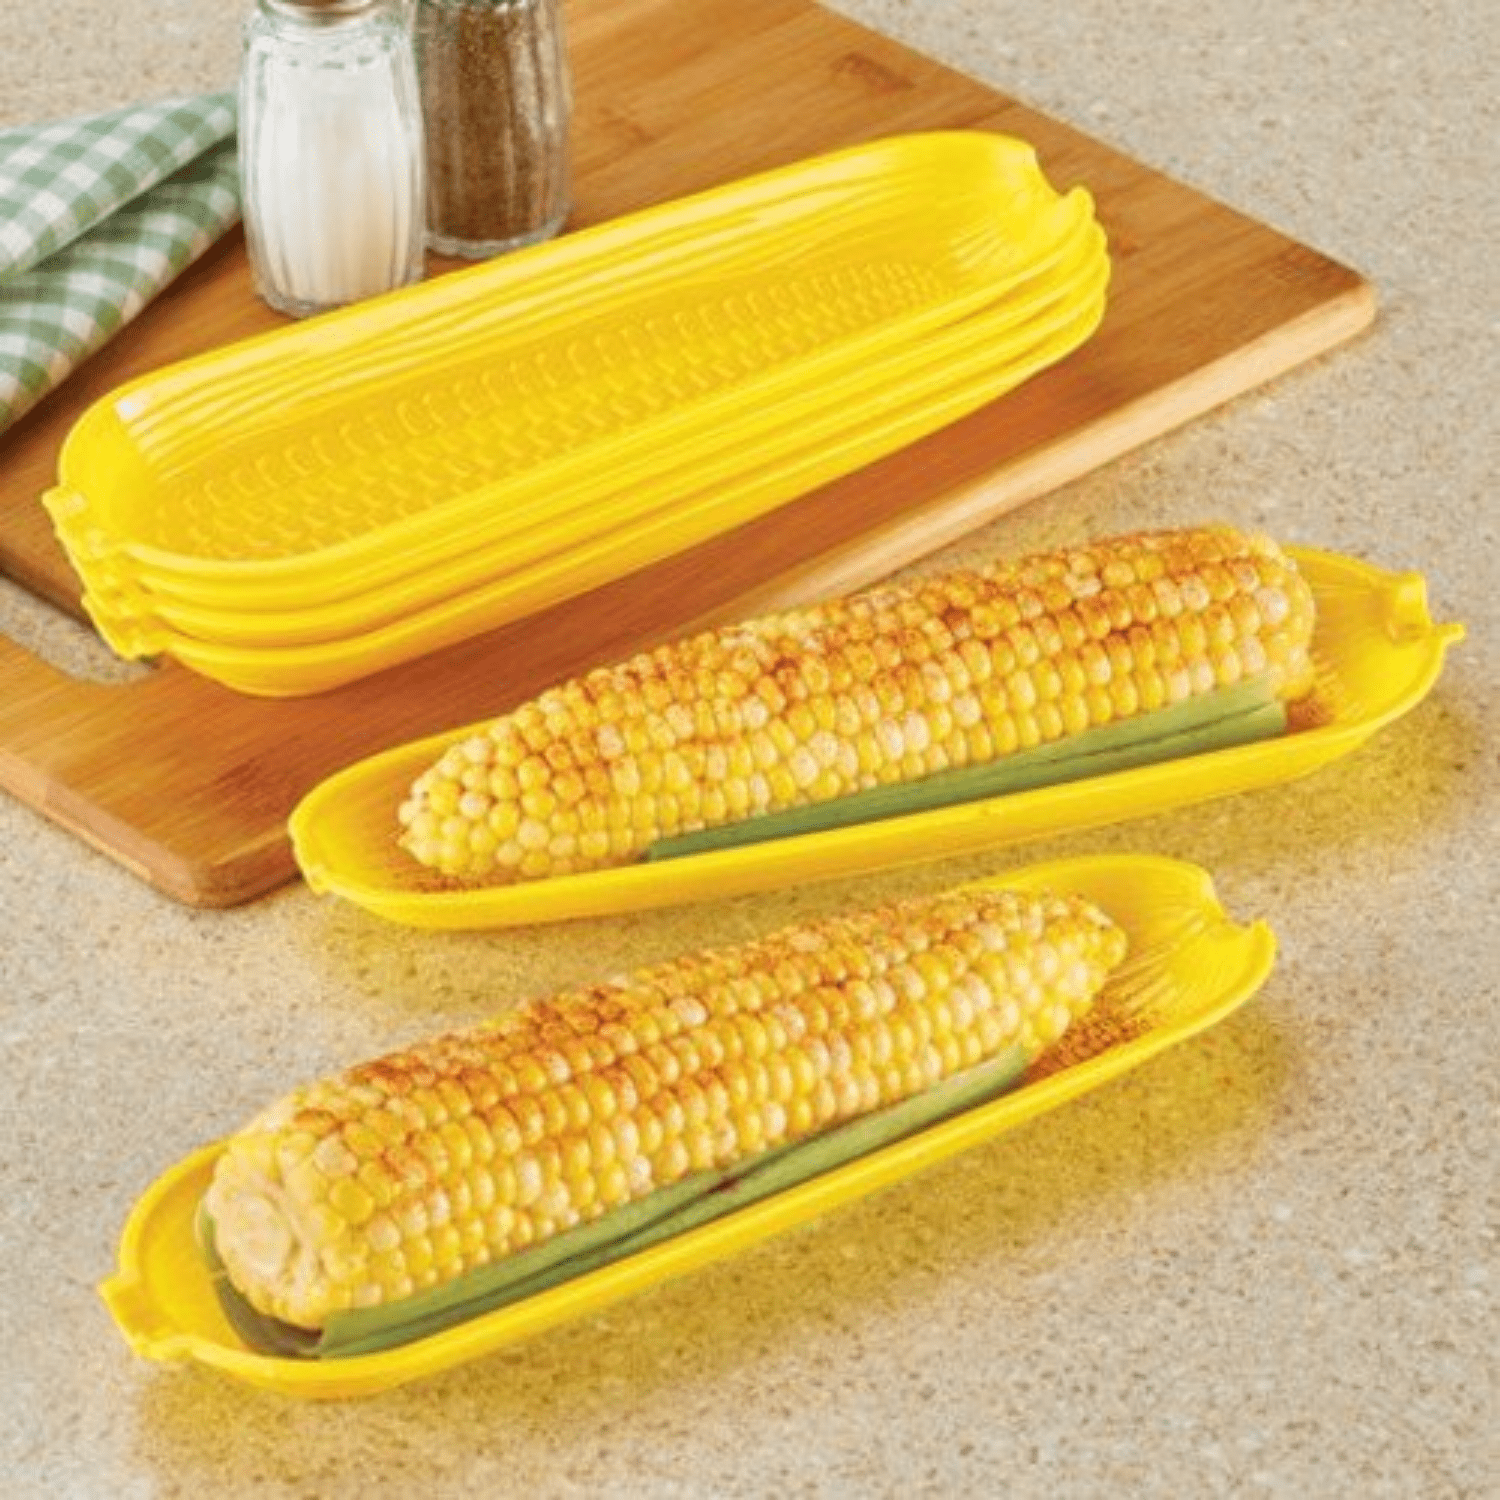 bundle with KC Napkin TM Corn On The Cob Tray Set of 8 Trays 16 Holders 24pcs Outdoor Indoor Serving Dinner Picnic Summer 